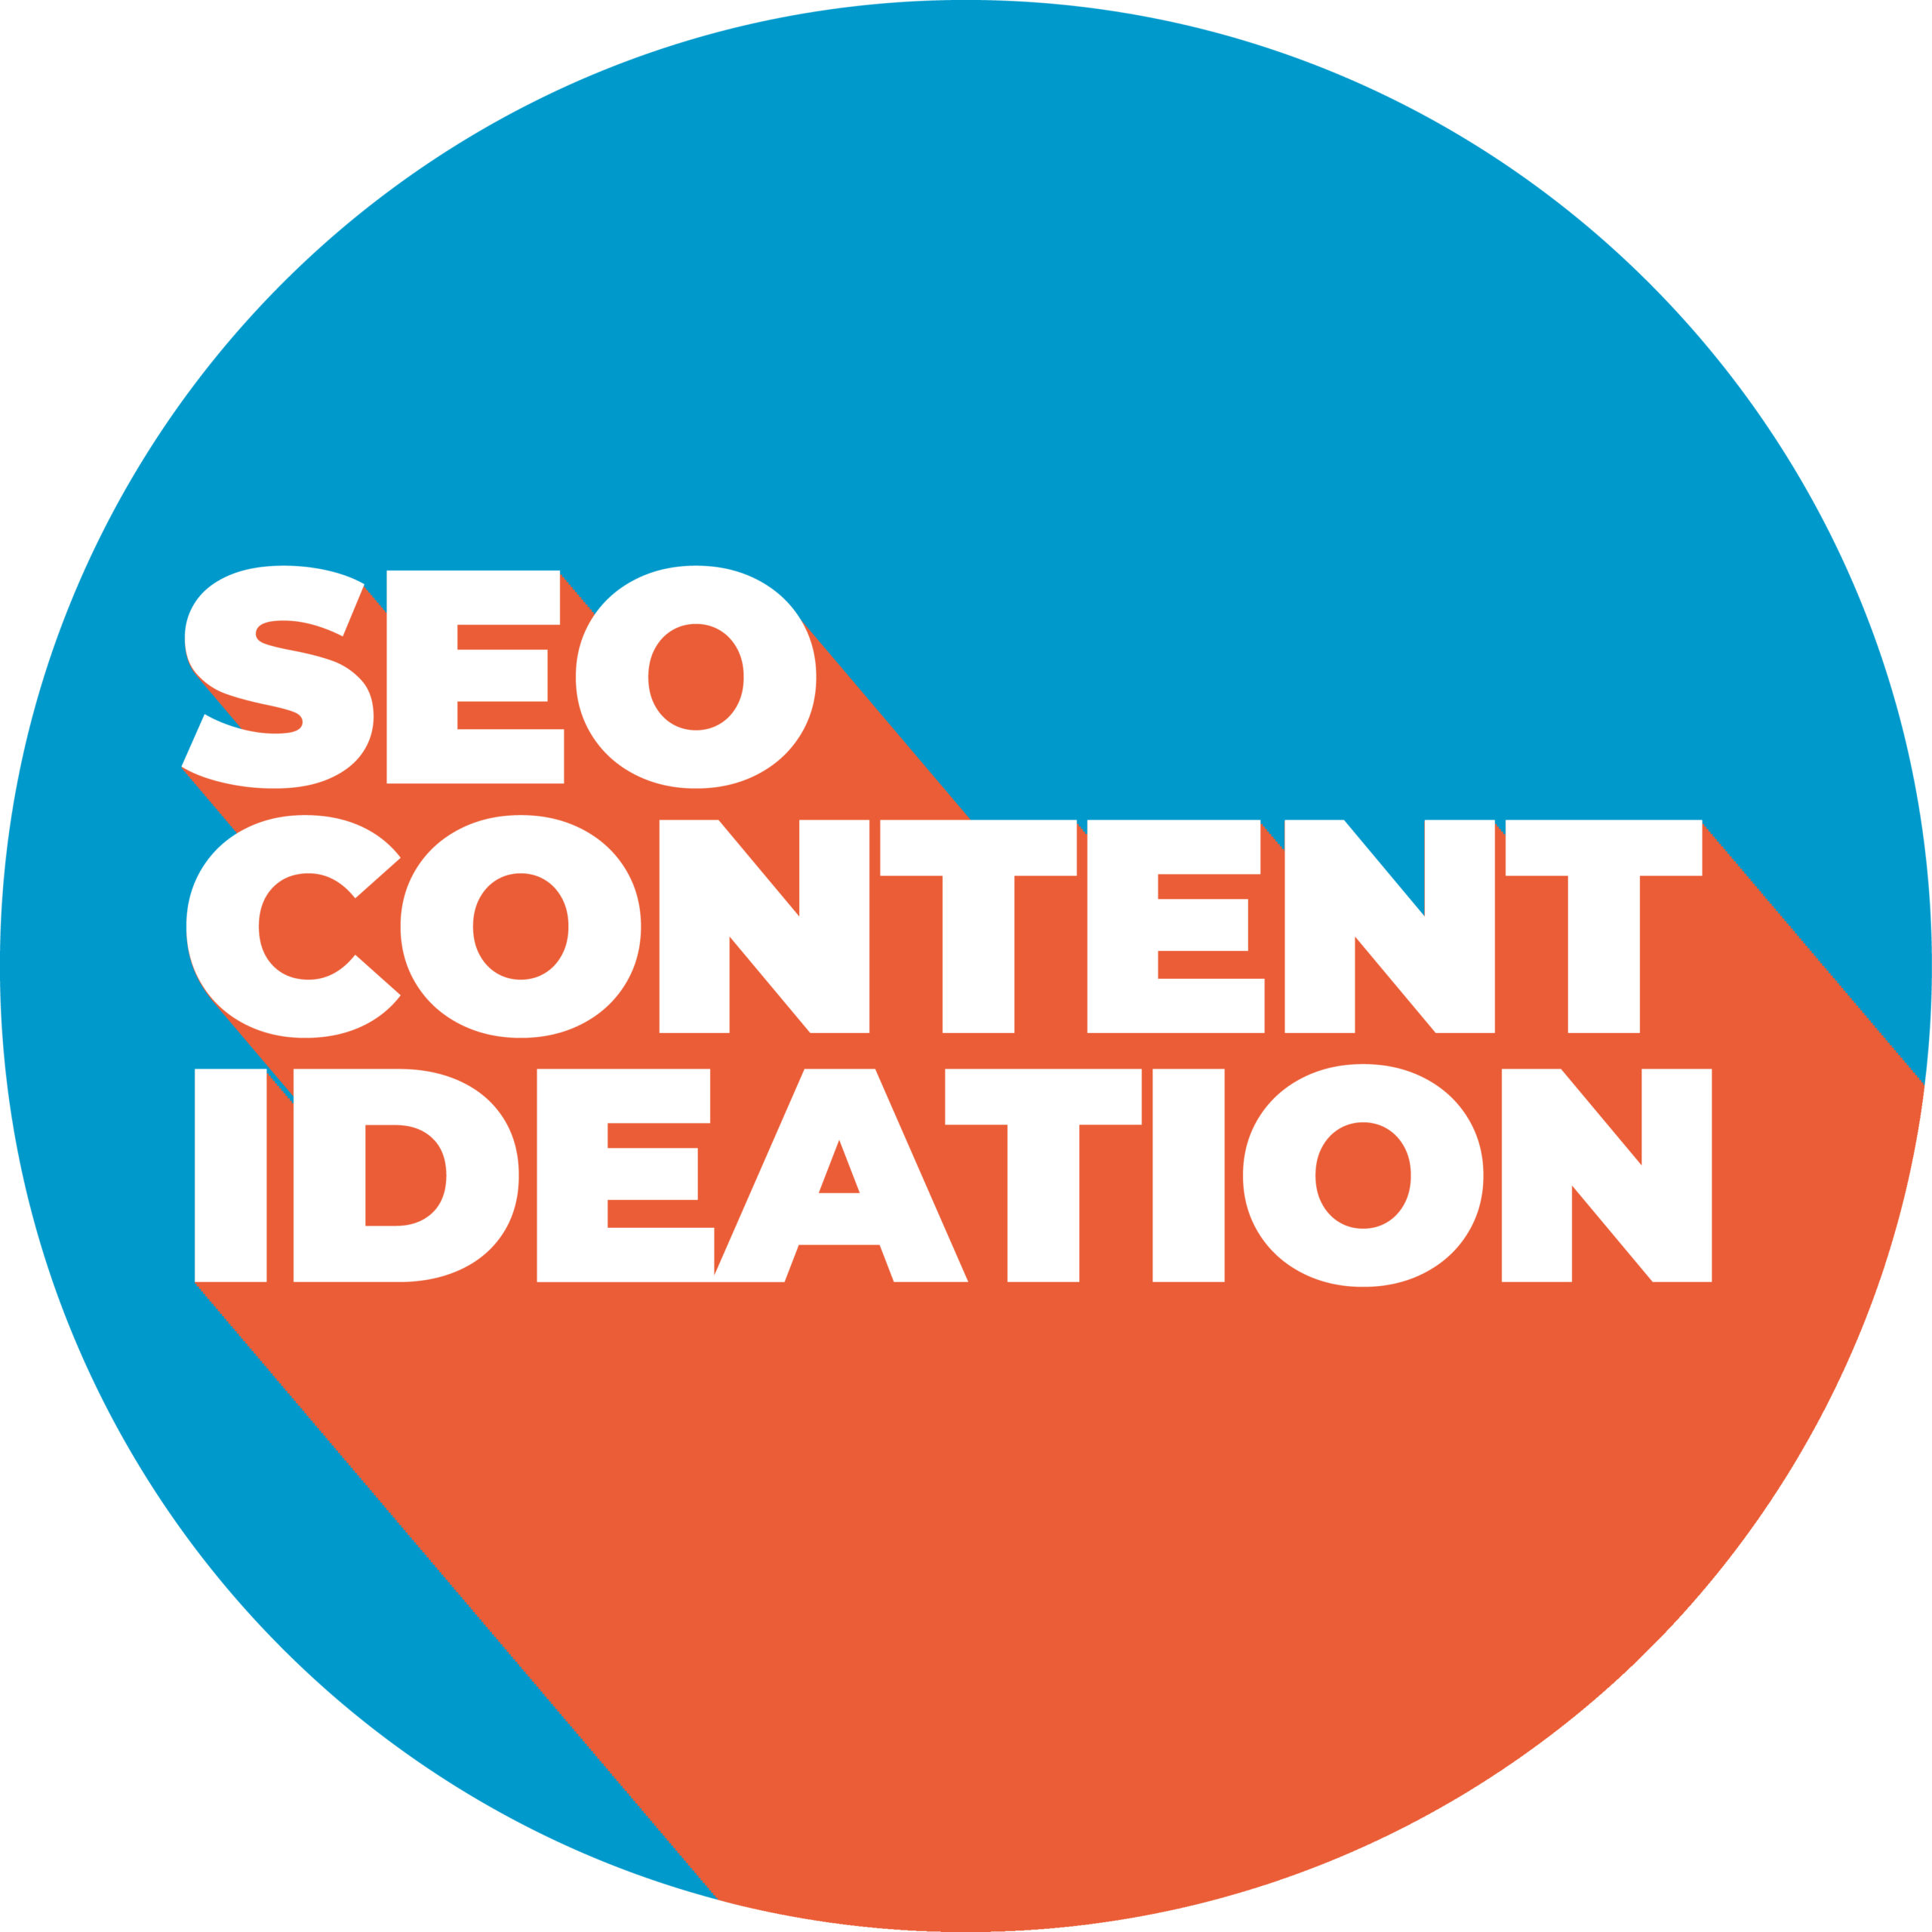 SEO Content Ideation